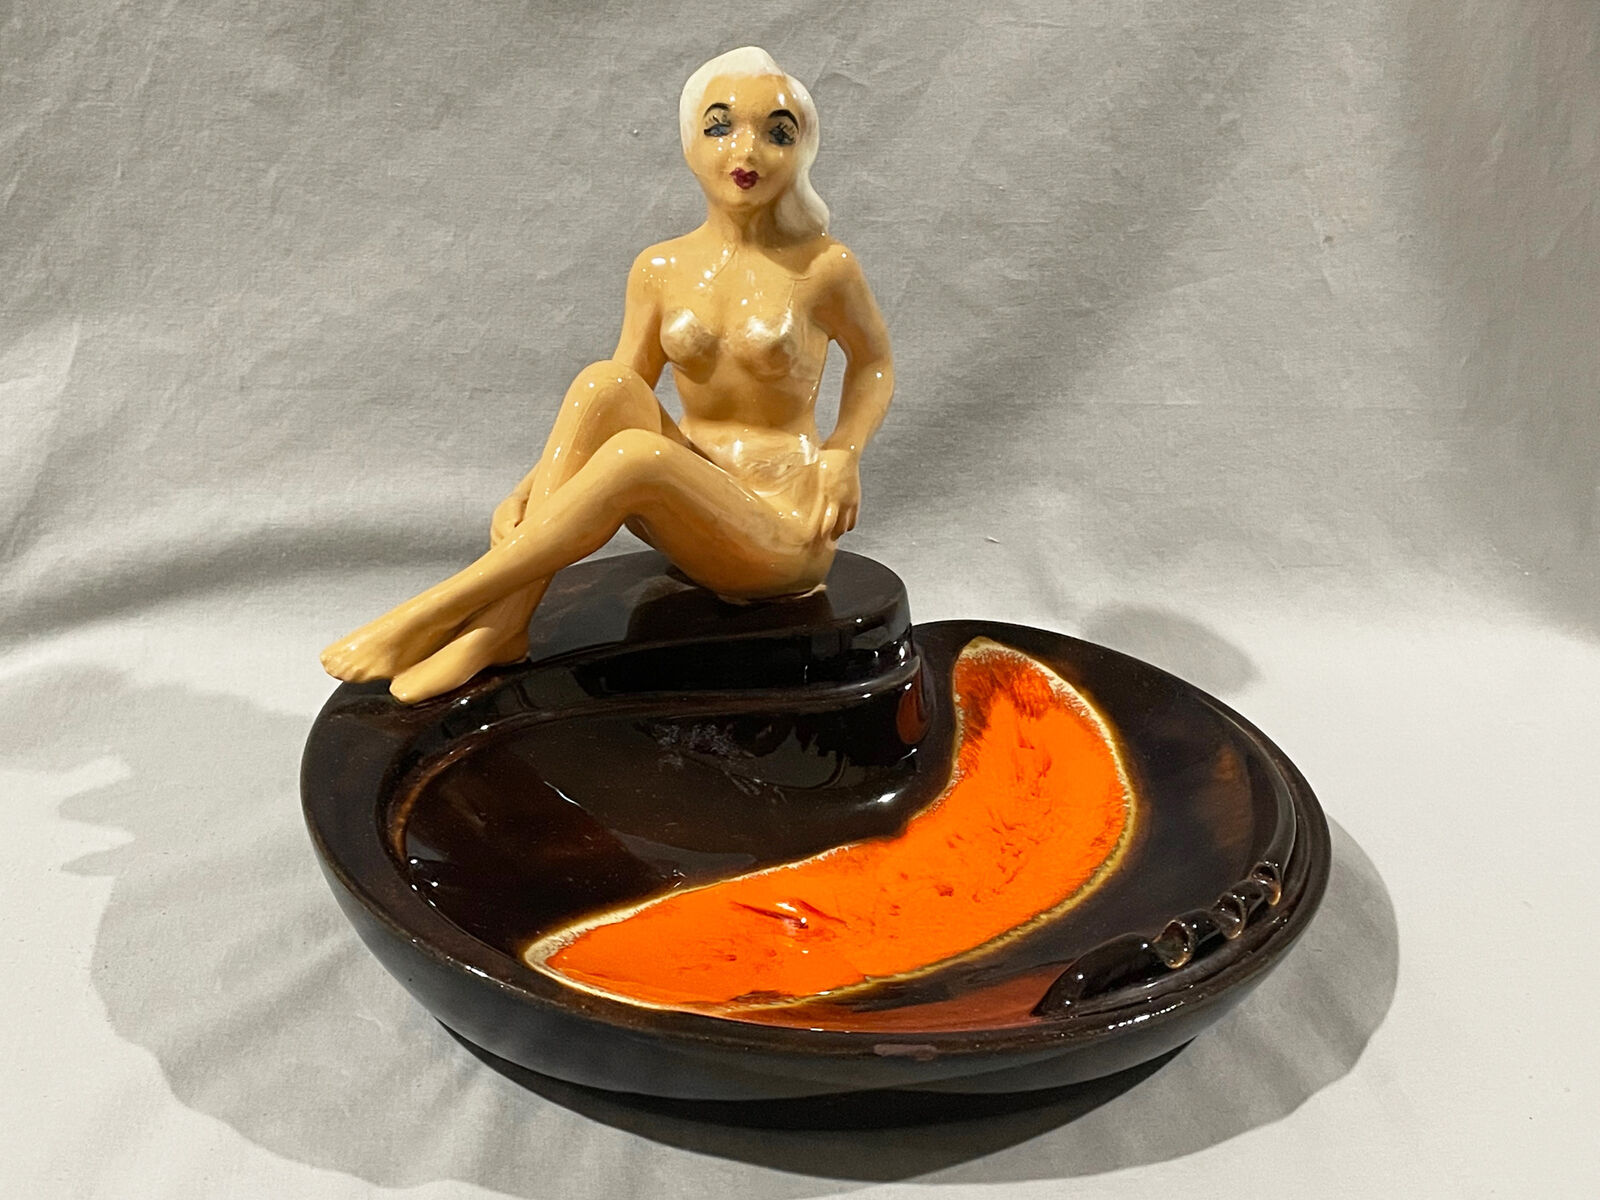 Vintage 1950s-60s PIN-UP NUDE LADY ASHTRAY